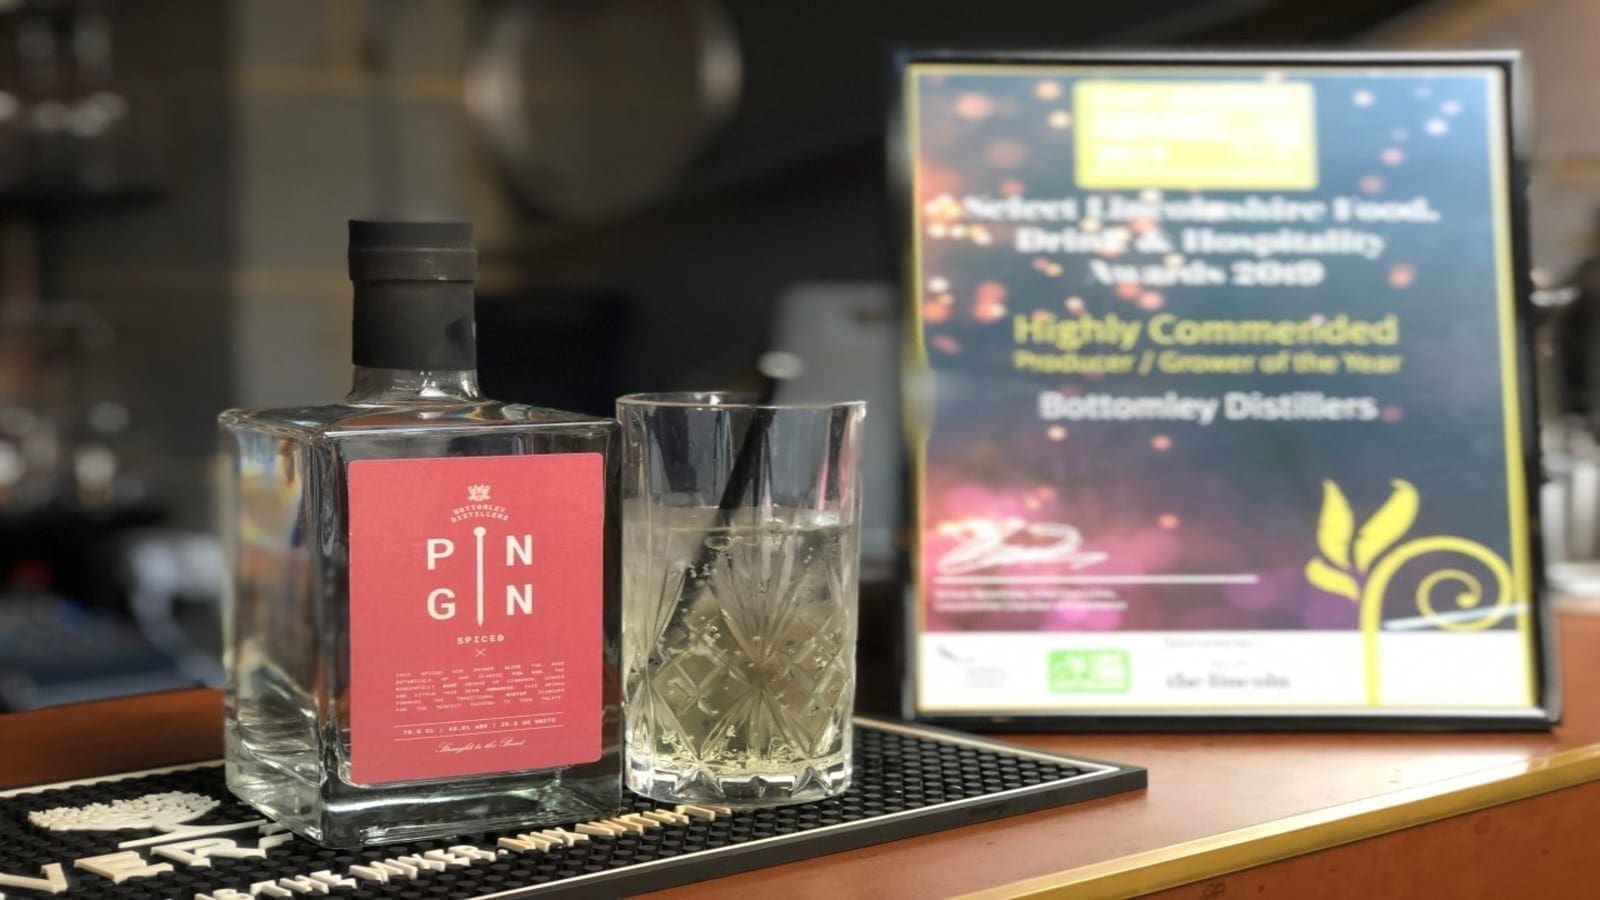 Next Frontier Brands acquires Bottomley Distillers in an effort to grow Pin Gin